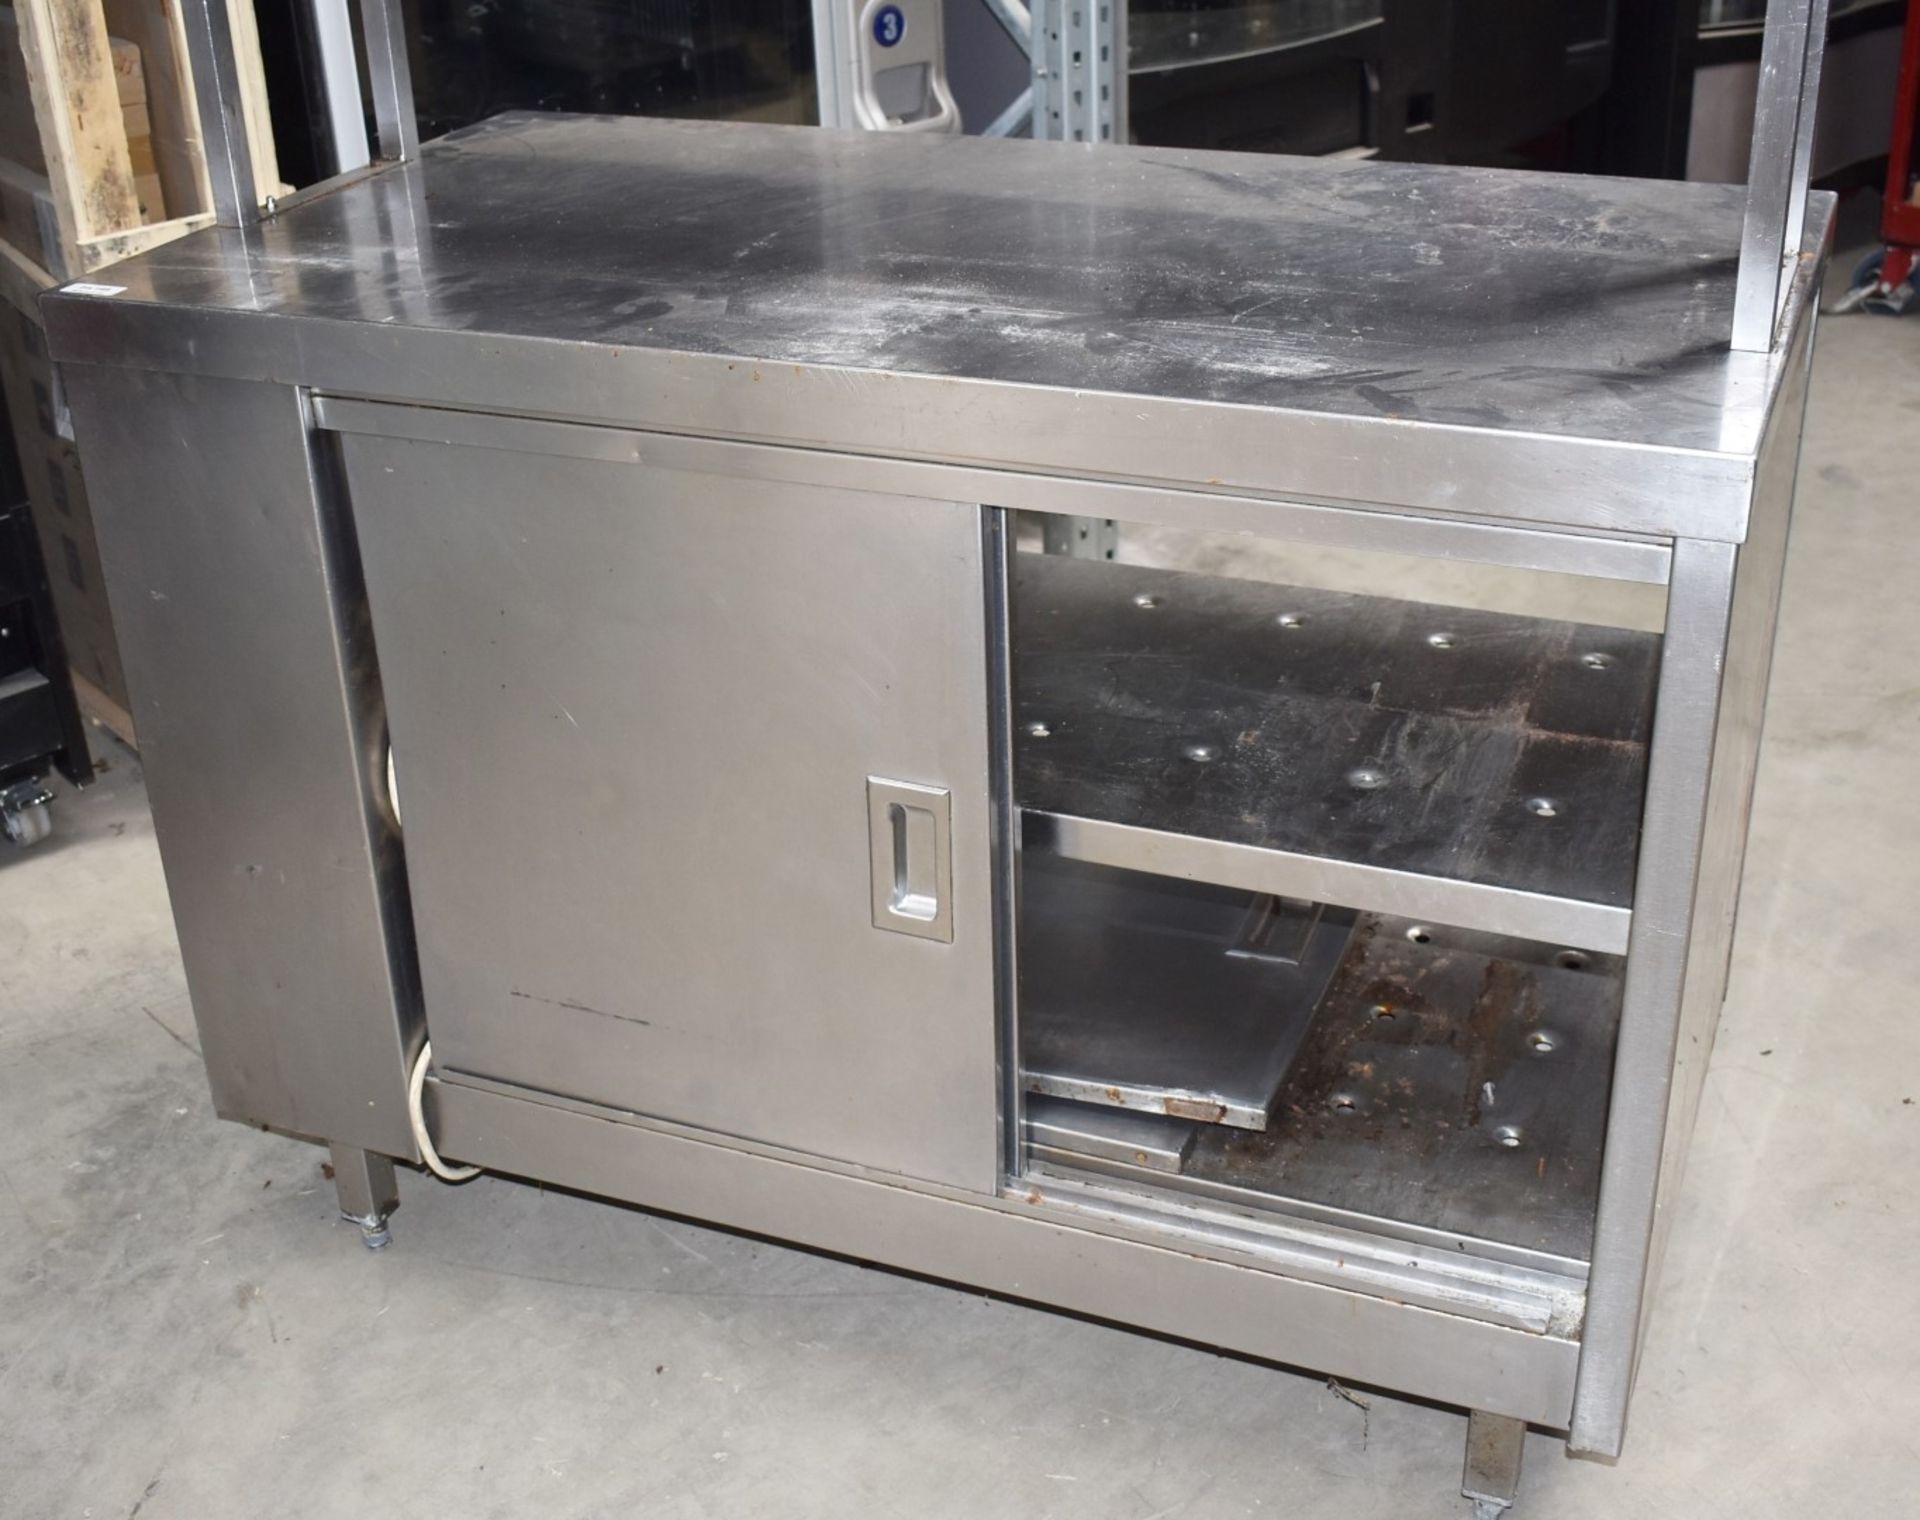 1 x Stainless Steel Hot Cabinet With Overhead Heated Passthrough Shelves and Order Ticket Rail - Image 9 of 11